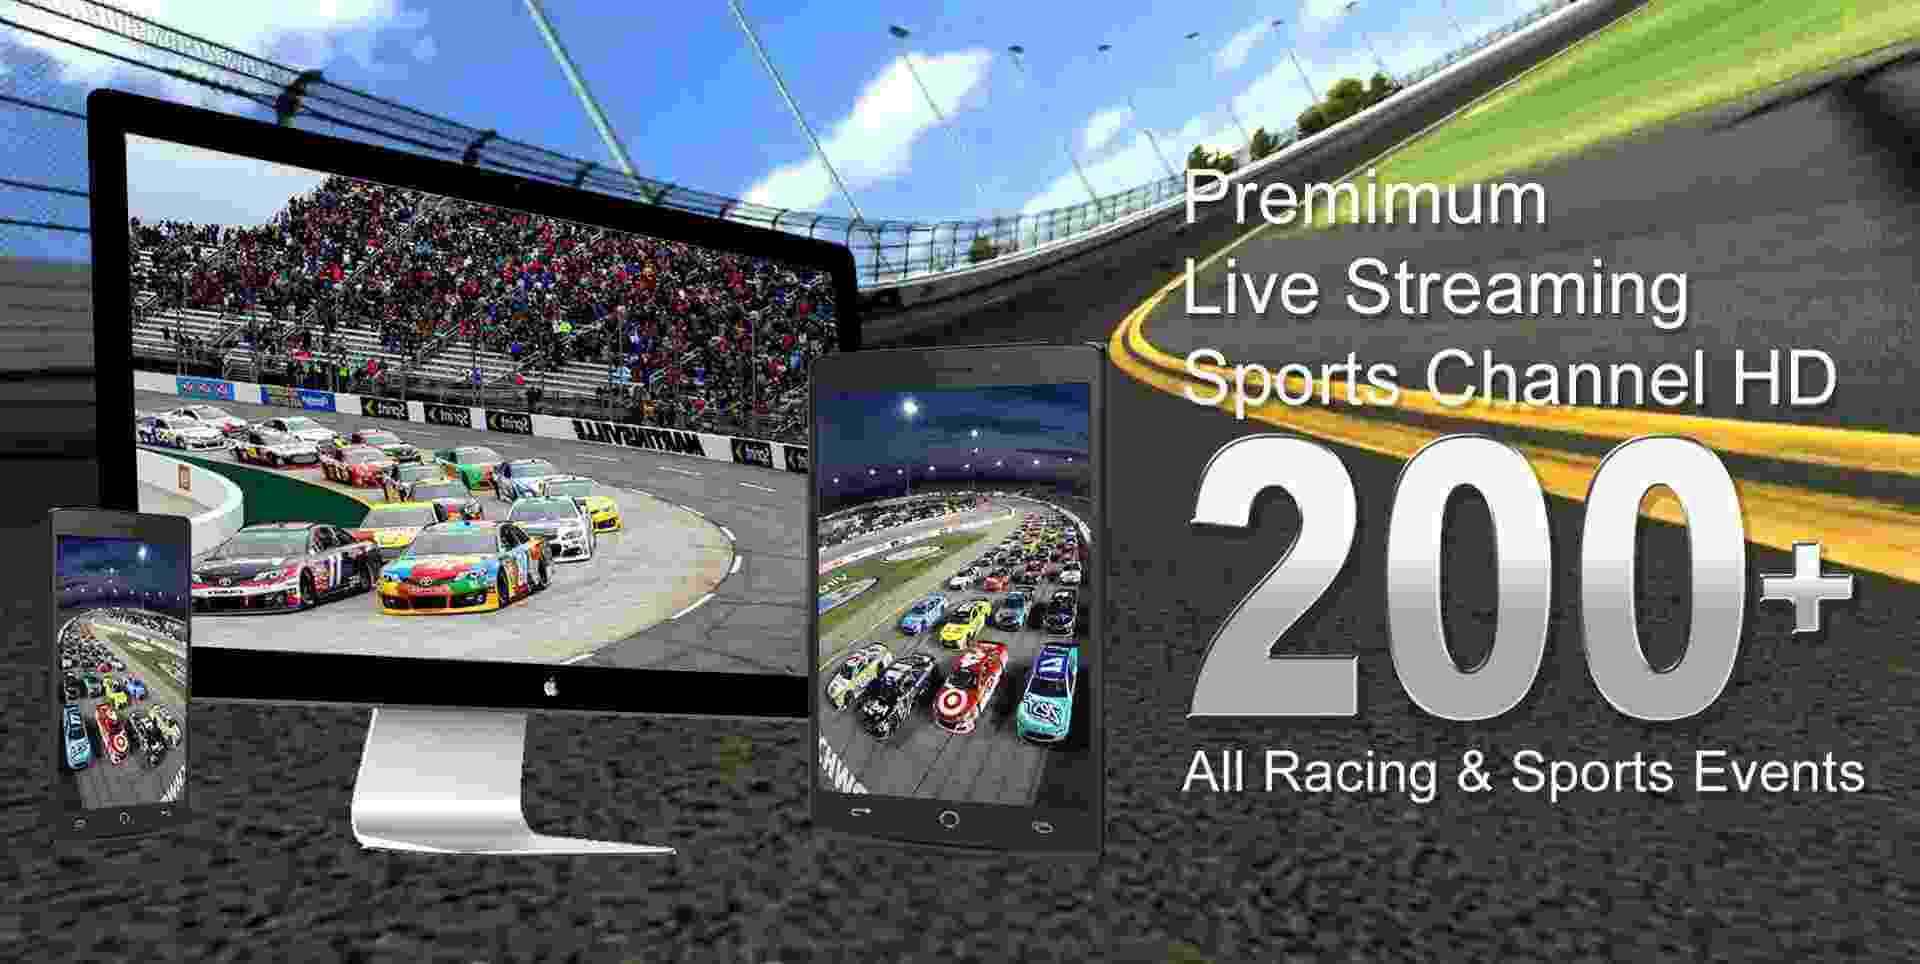 Nascar Sprint Cup Series at Charlotte